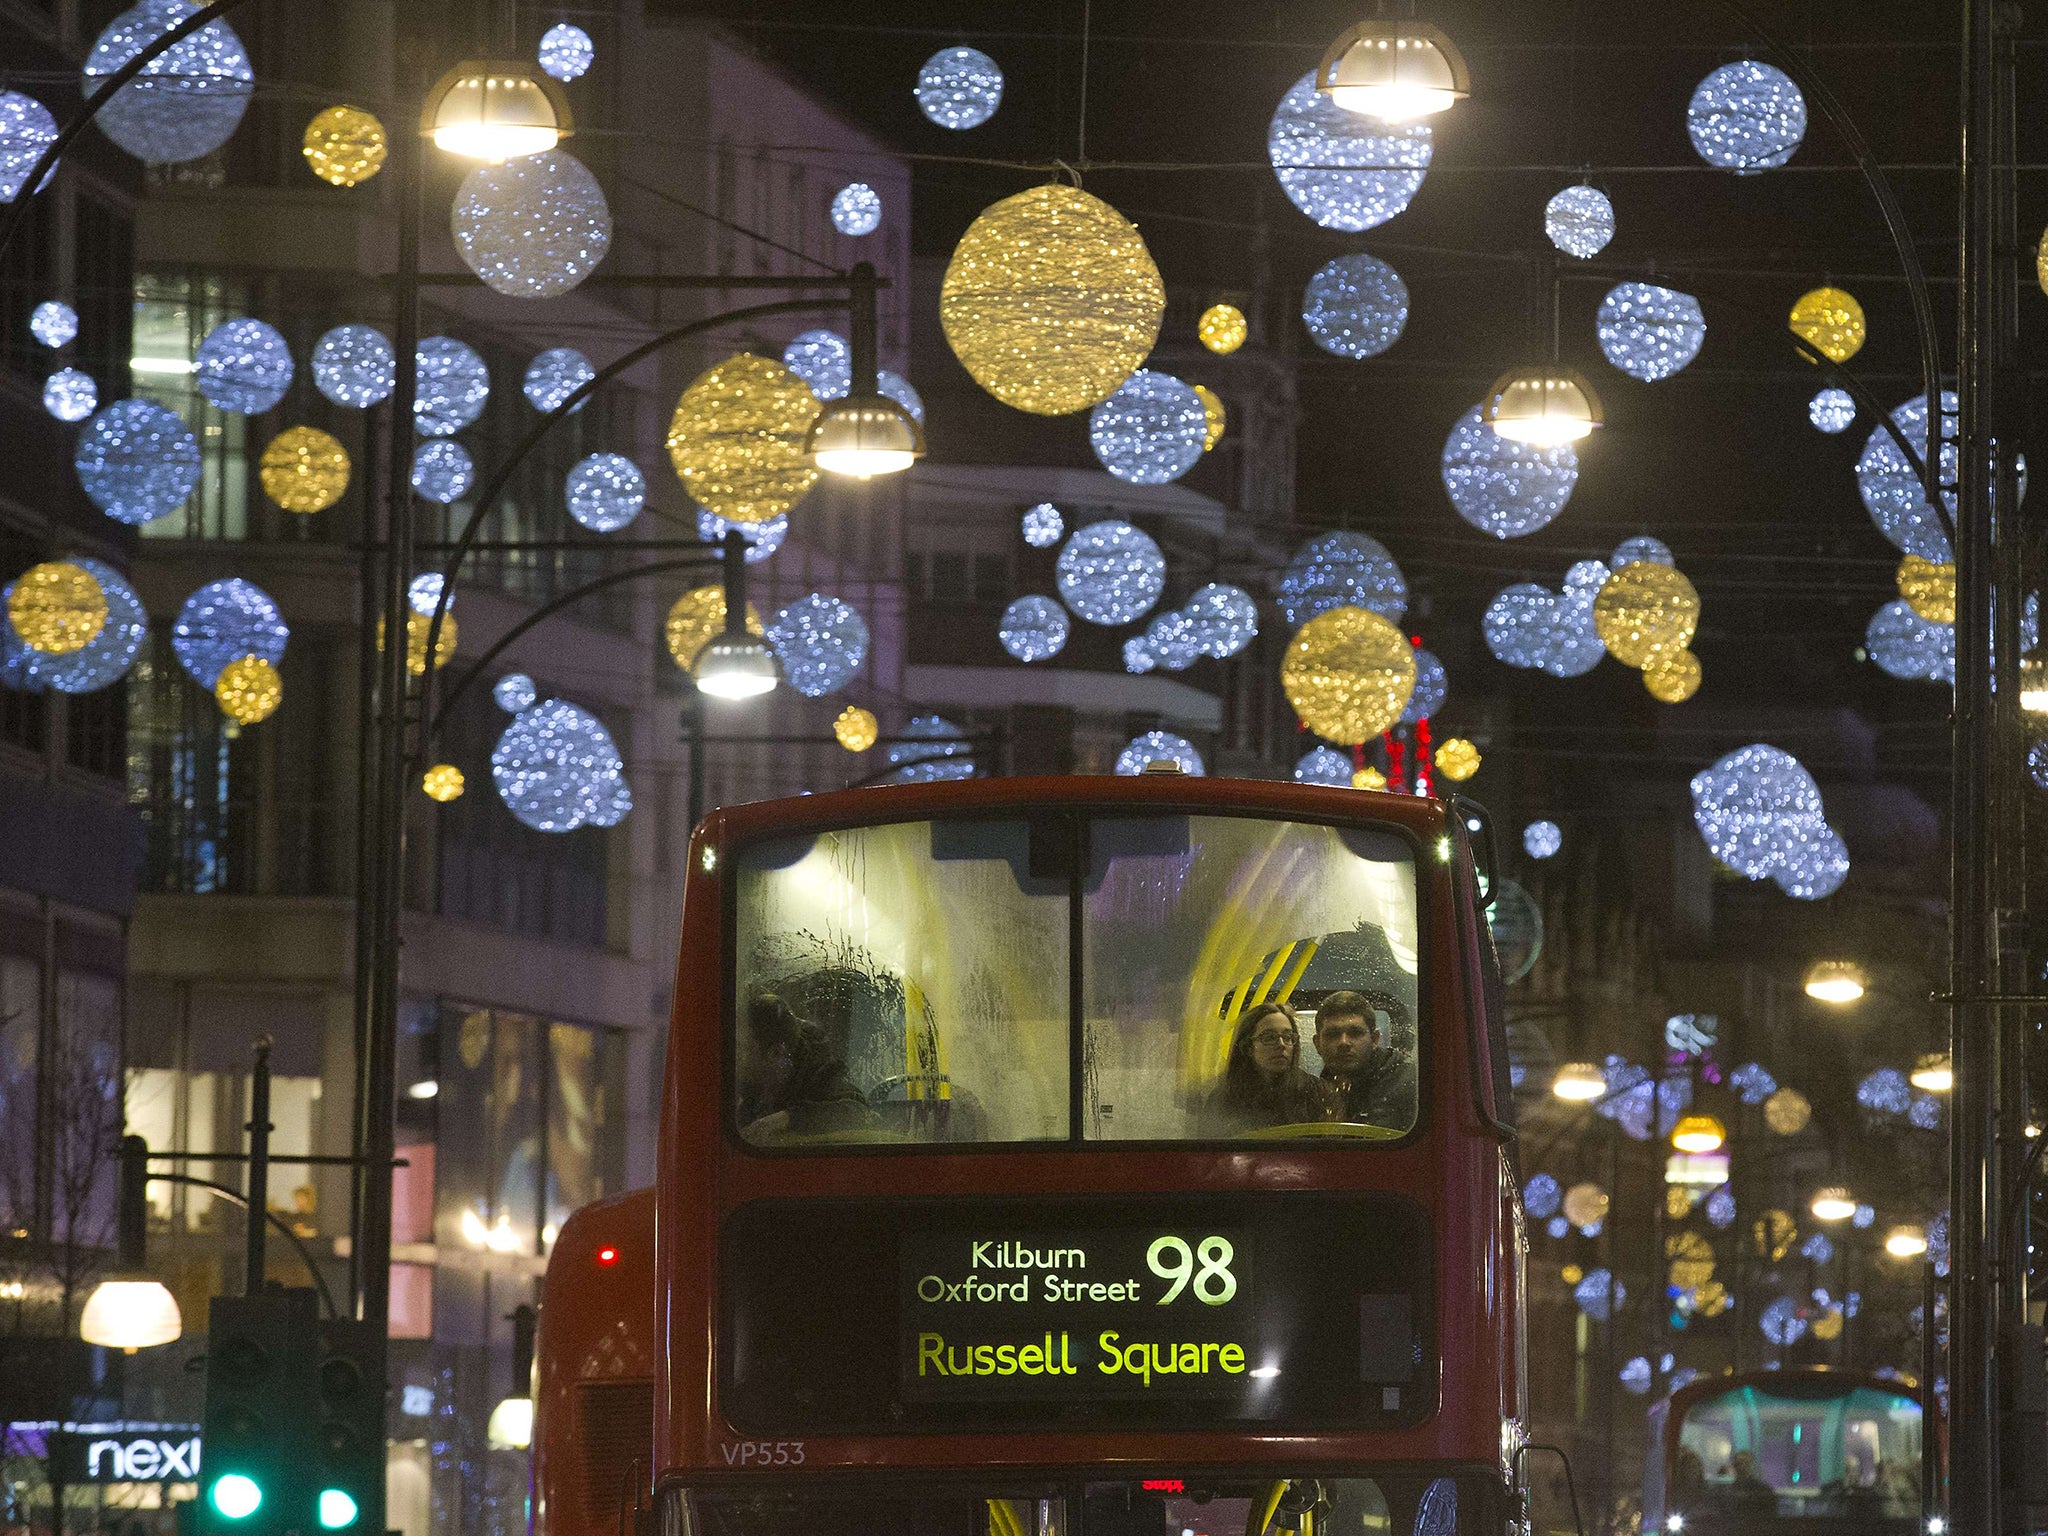 The Oxford Street Christmas lights of 2016, as switched on by pop star Craig David